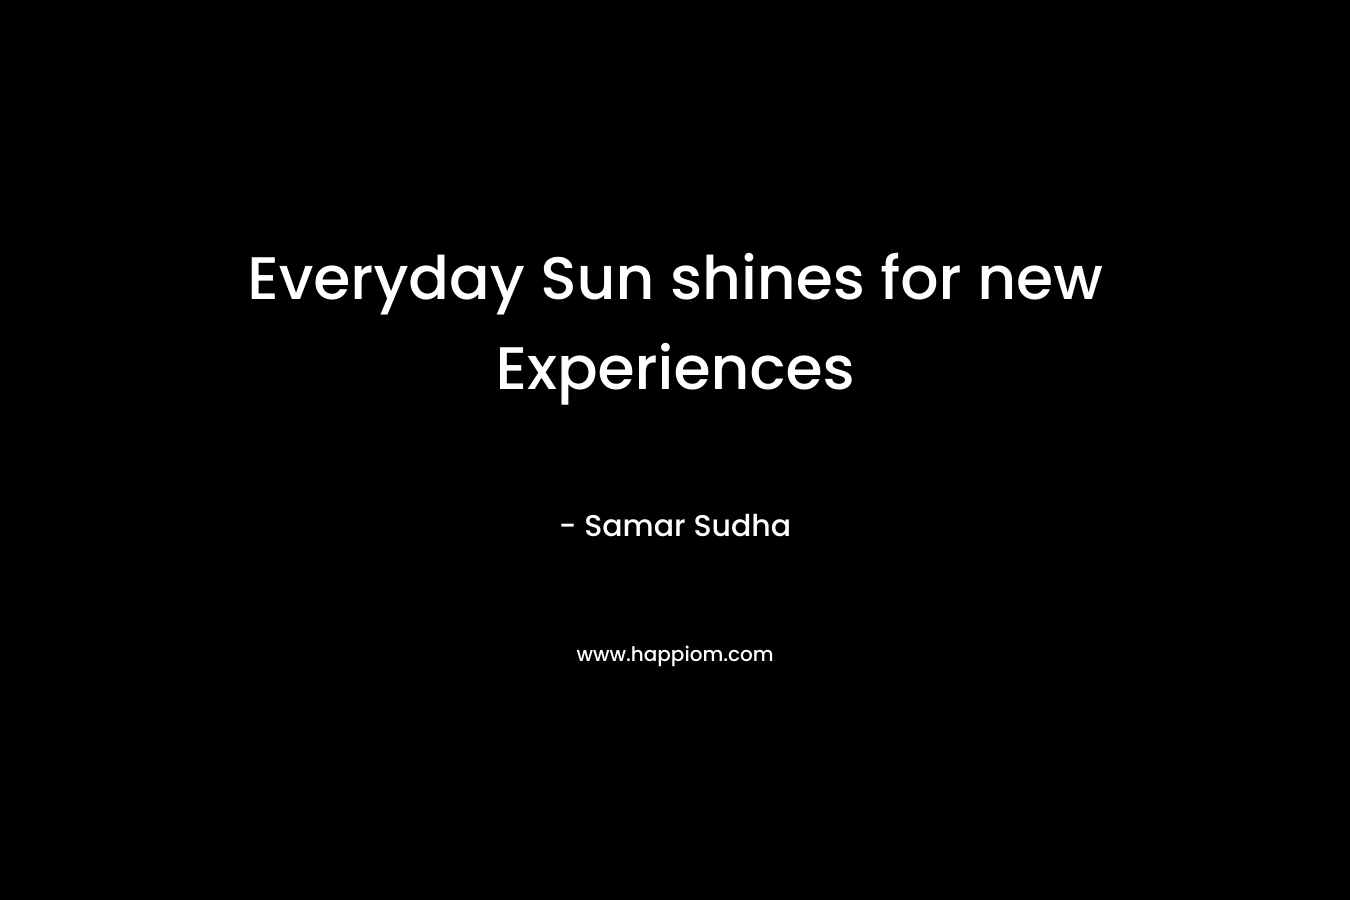 Everyday Sun shines for new Experiences